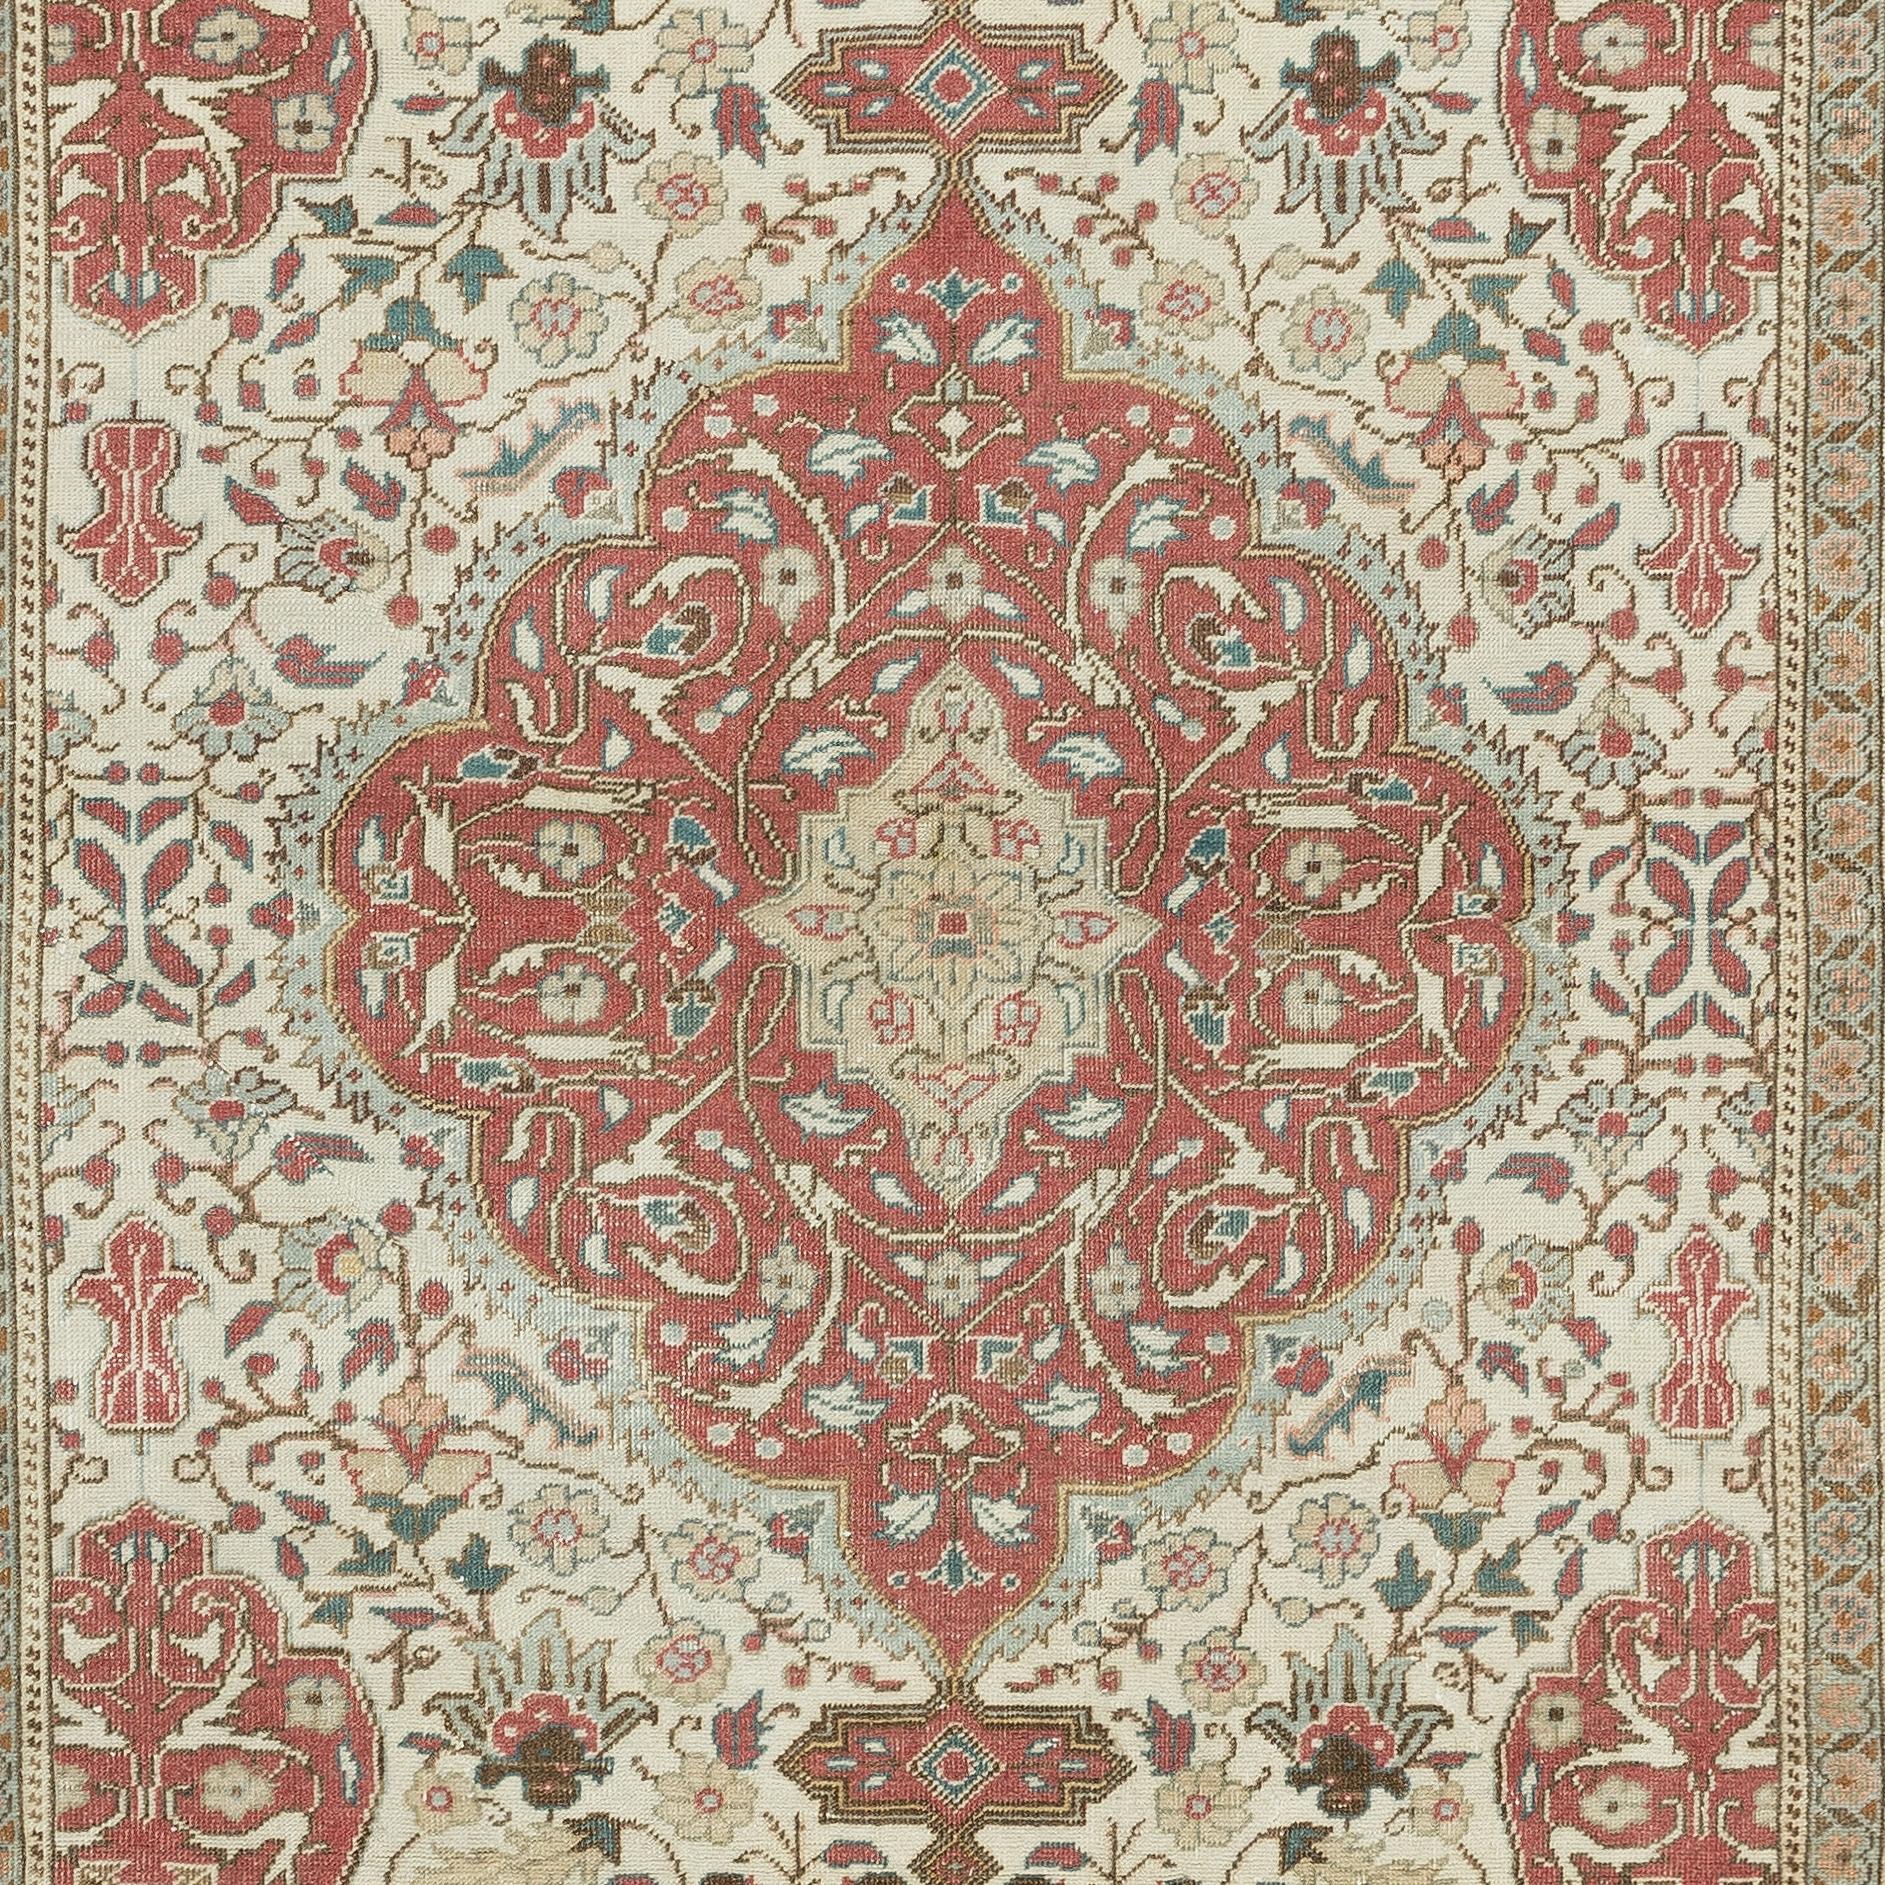 5x7 ft Modern Handmade Turkish Area Rug with Medallion Design, 100% Wool In Excellent Condition For Sale In Philadelphia, PA